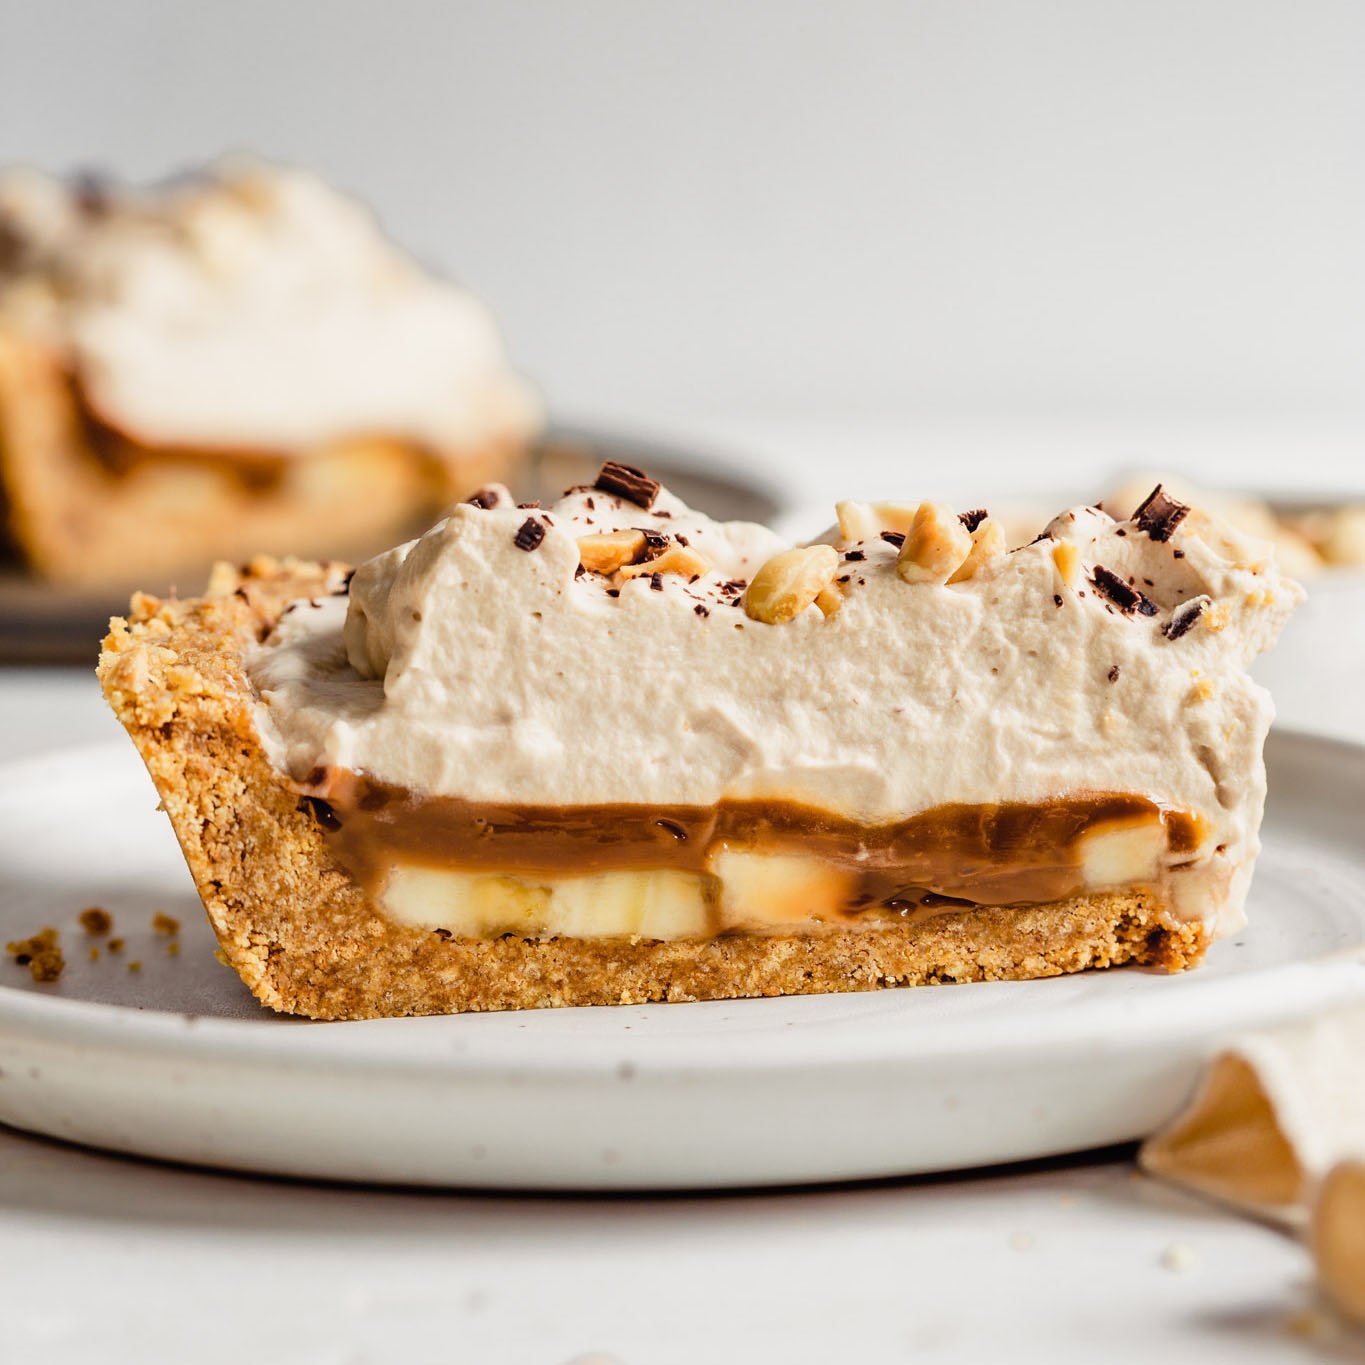 Slice of banoffee pie on a white plate.